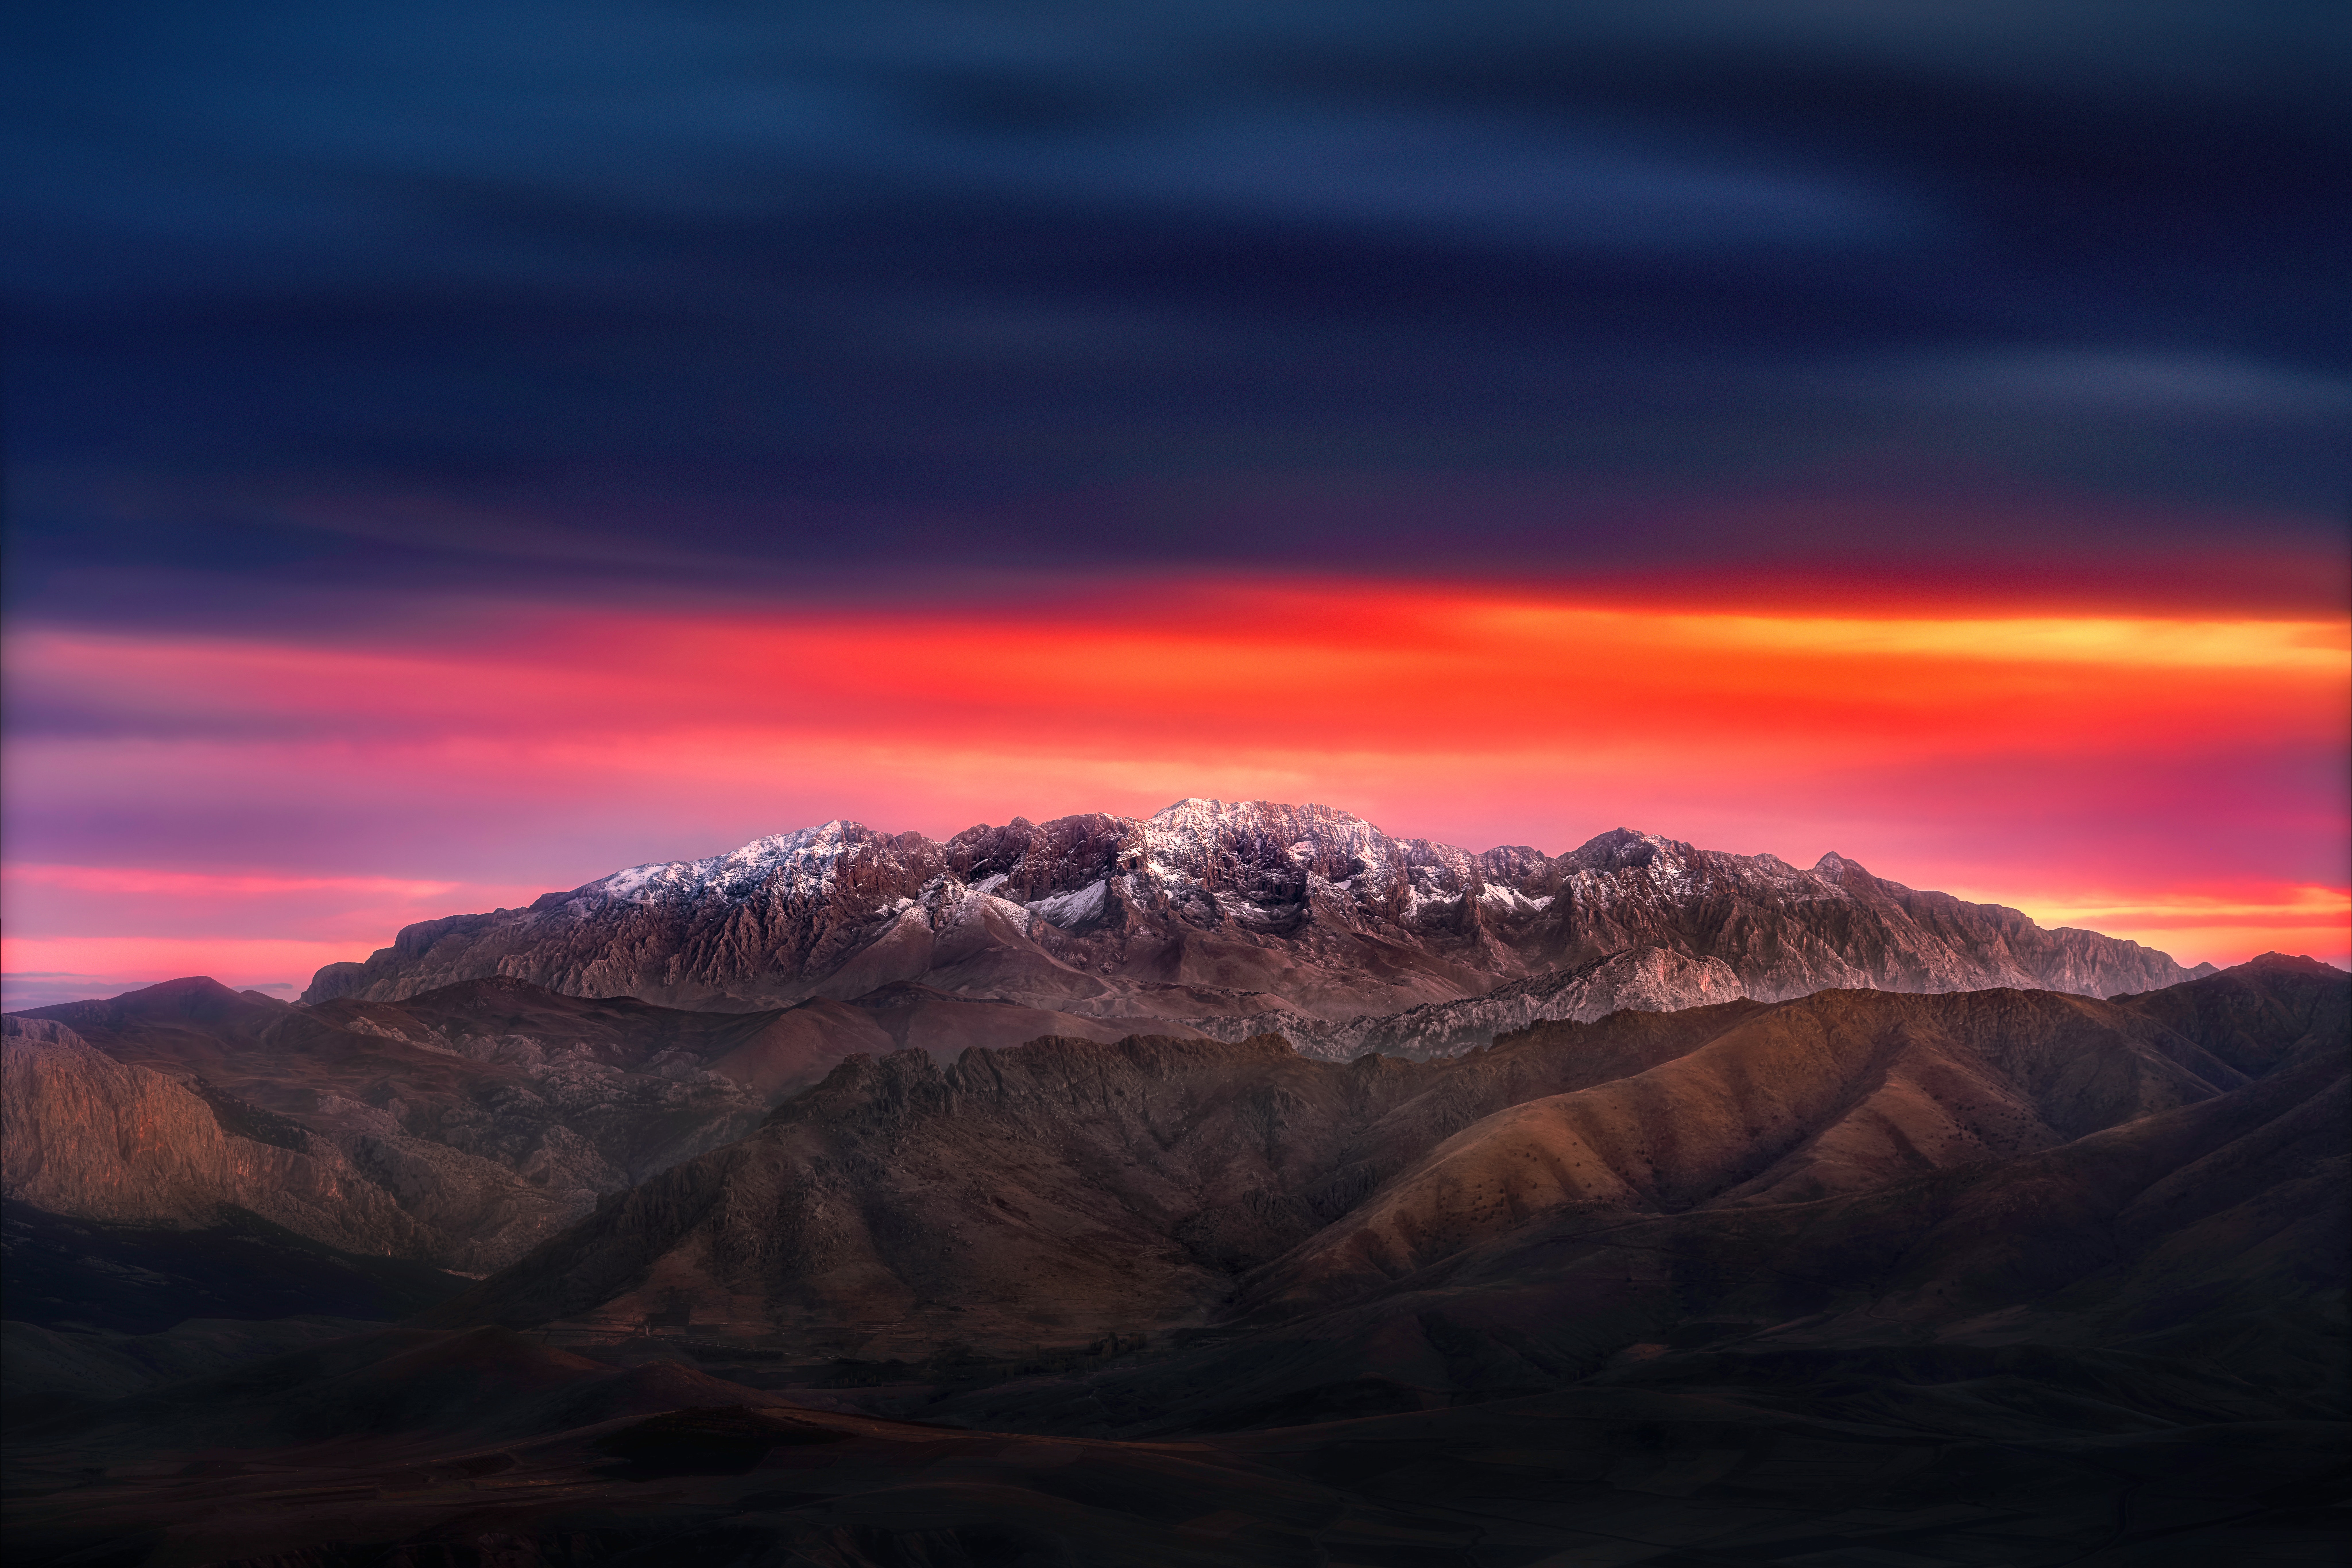 Landscape Photography Sunset Mountains Abstract Nature Snow Clouds 8192x5461